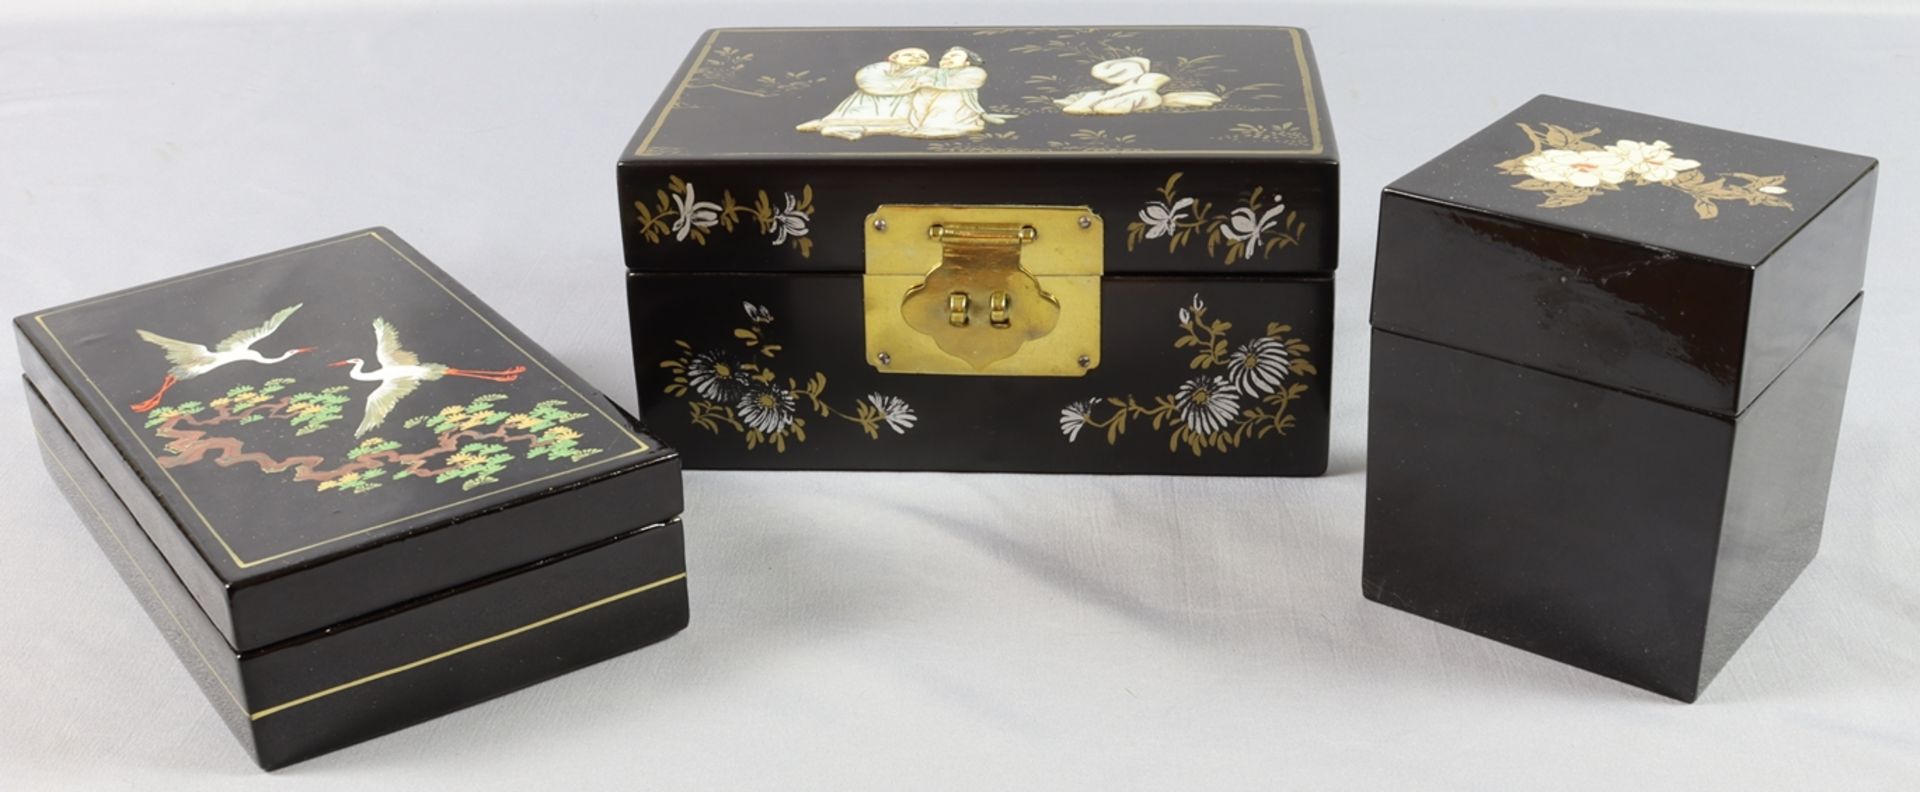 Lot of three Asian jewellery boxes, 19th/20th c., China, Japan